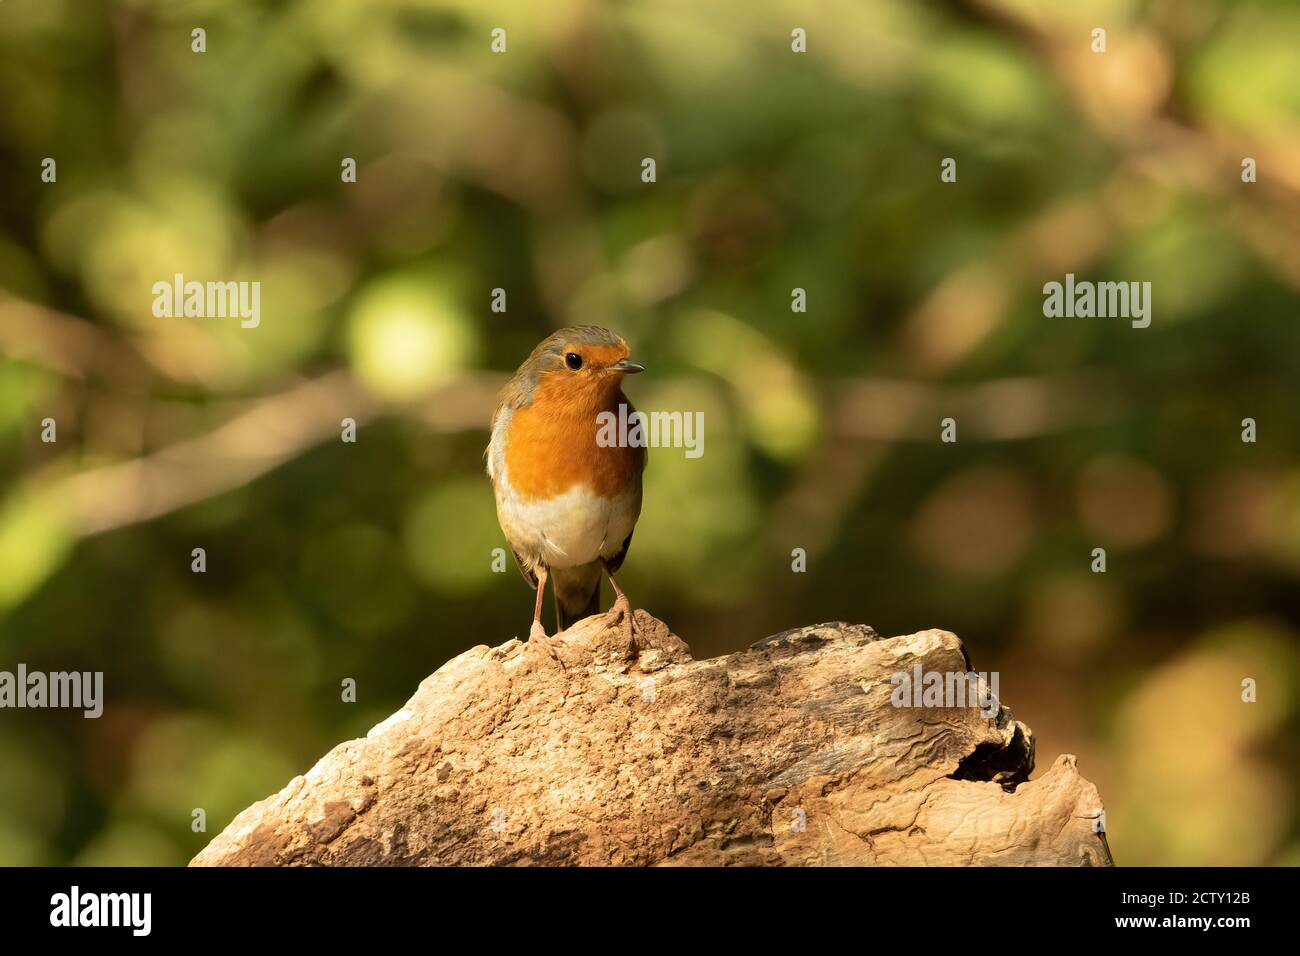 Cheerful Robin redbreast, Erithacus rubecula, perched on tree stump with bokeh background Stock Photo